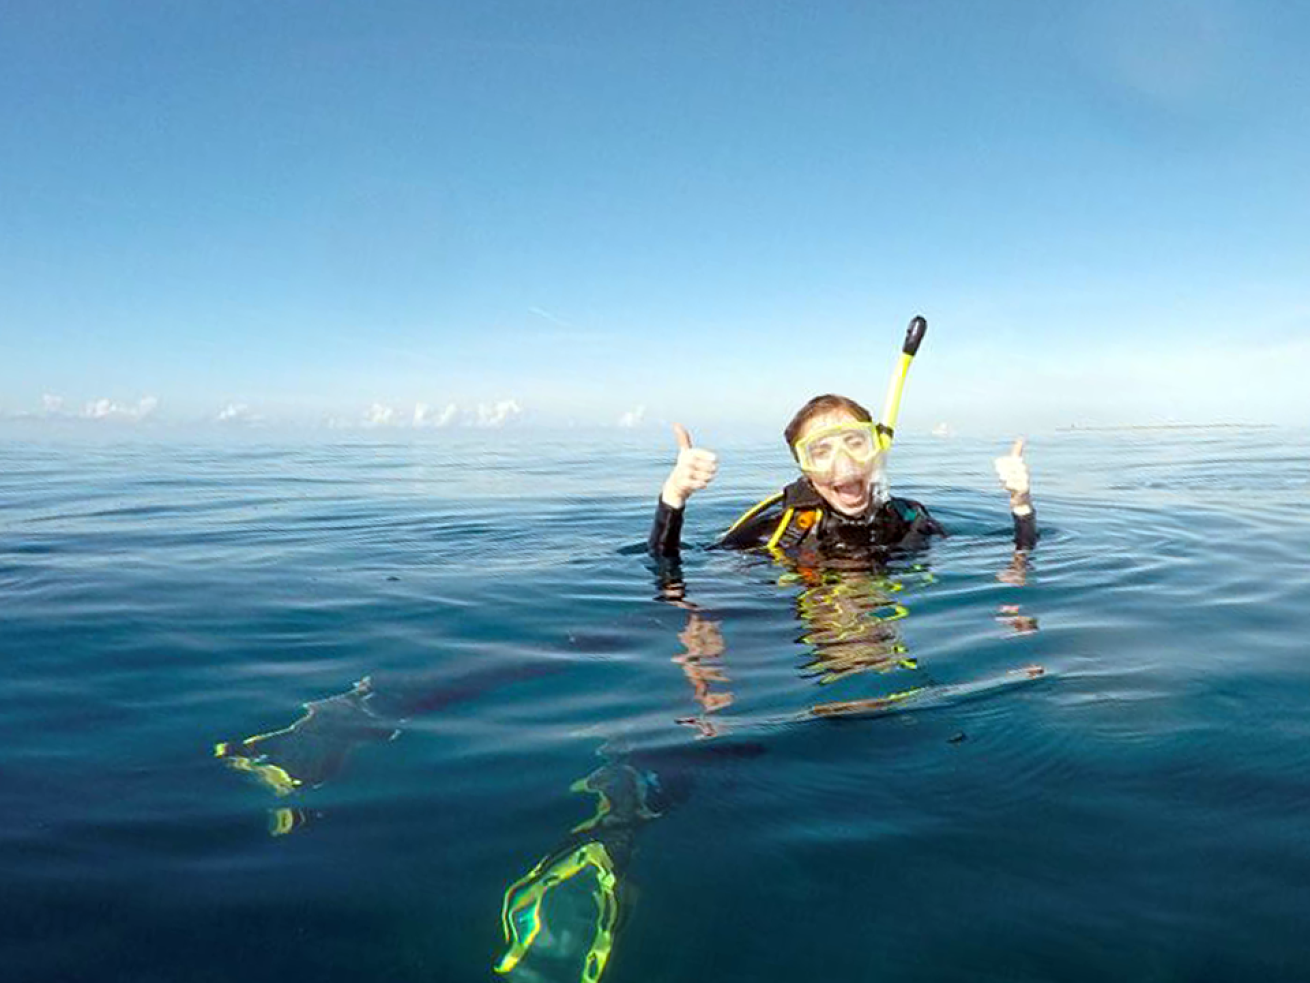 The author’s first open water dive photo after getting certified in the Bahamas.